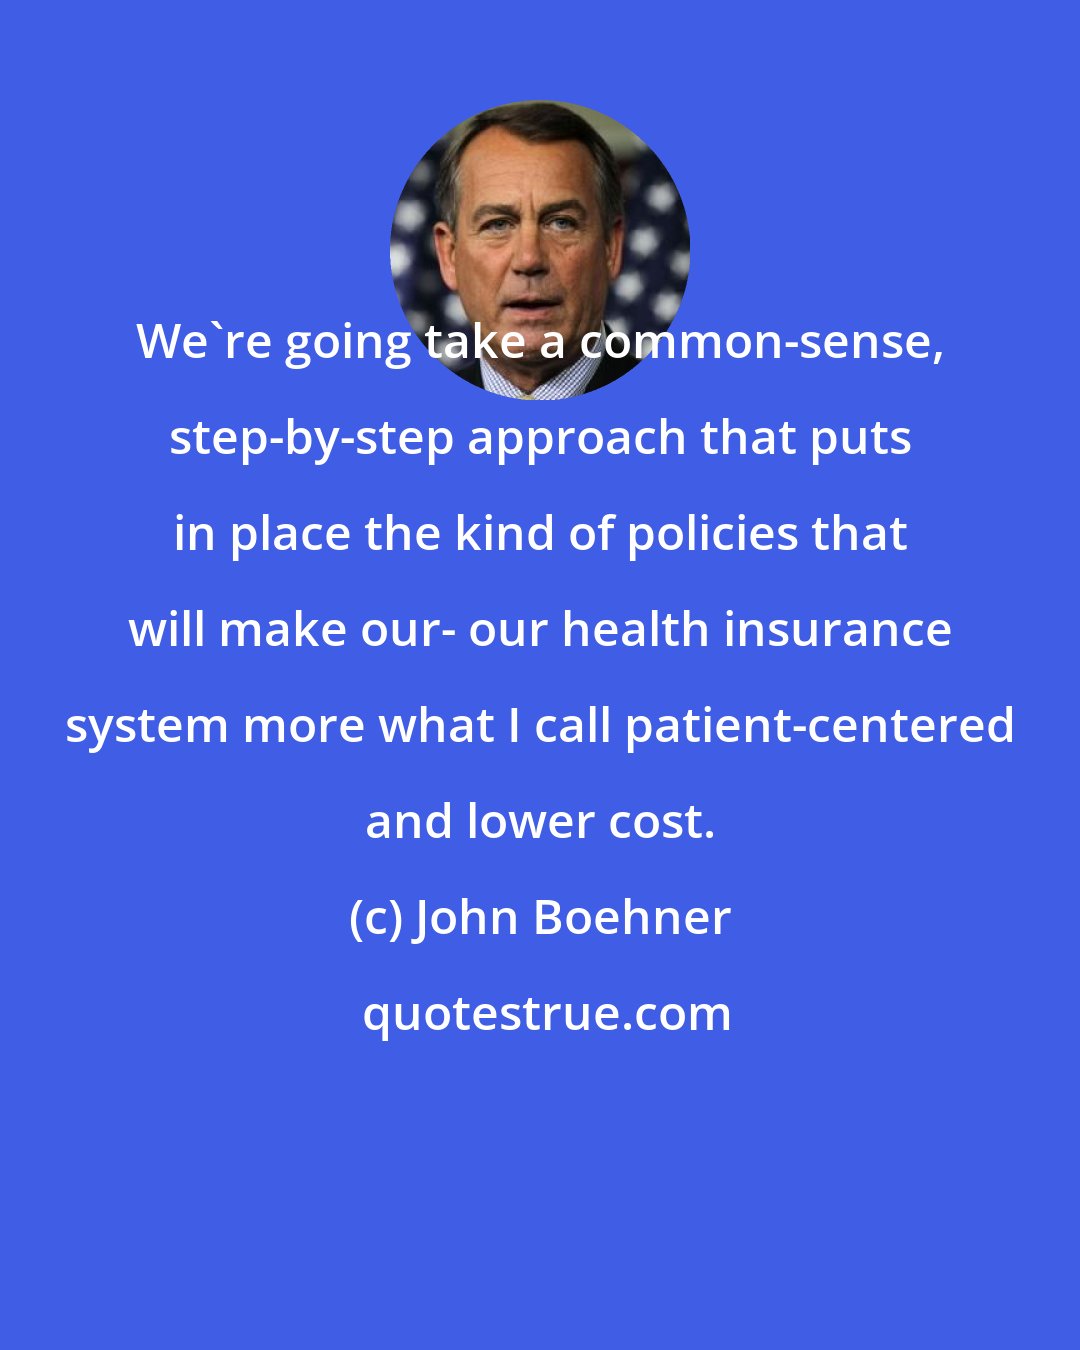 John Boehner: We're going take a common-sense, step-by-step approach that puts in place the kind of policies that will make our- our health insurance system more what I call patient-centered and lower cost.